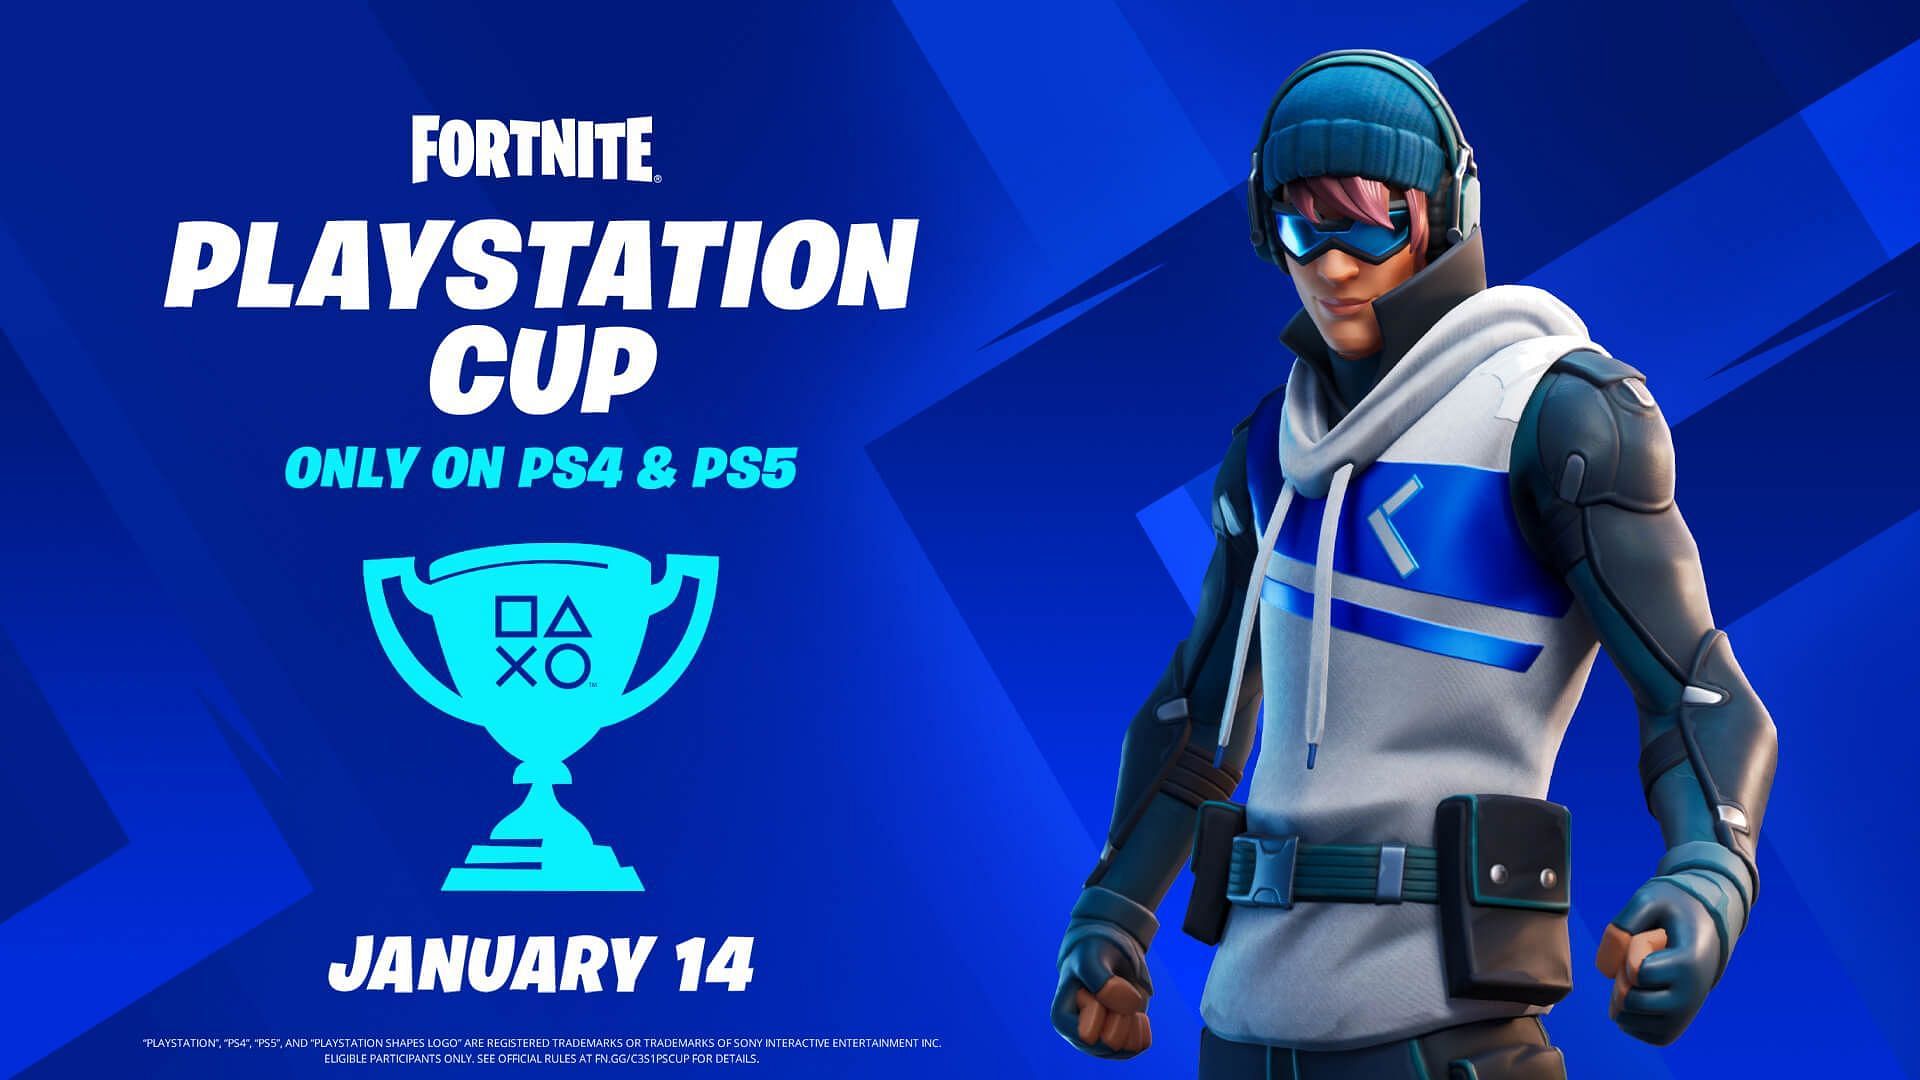 Fortnite PlayStation Cup 2022 announced: Start date, prize pool, and more